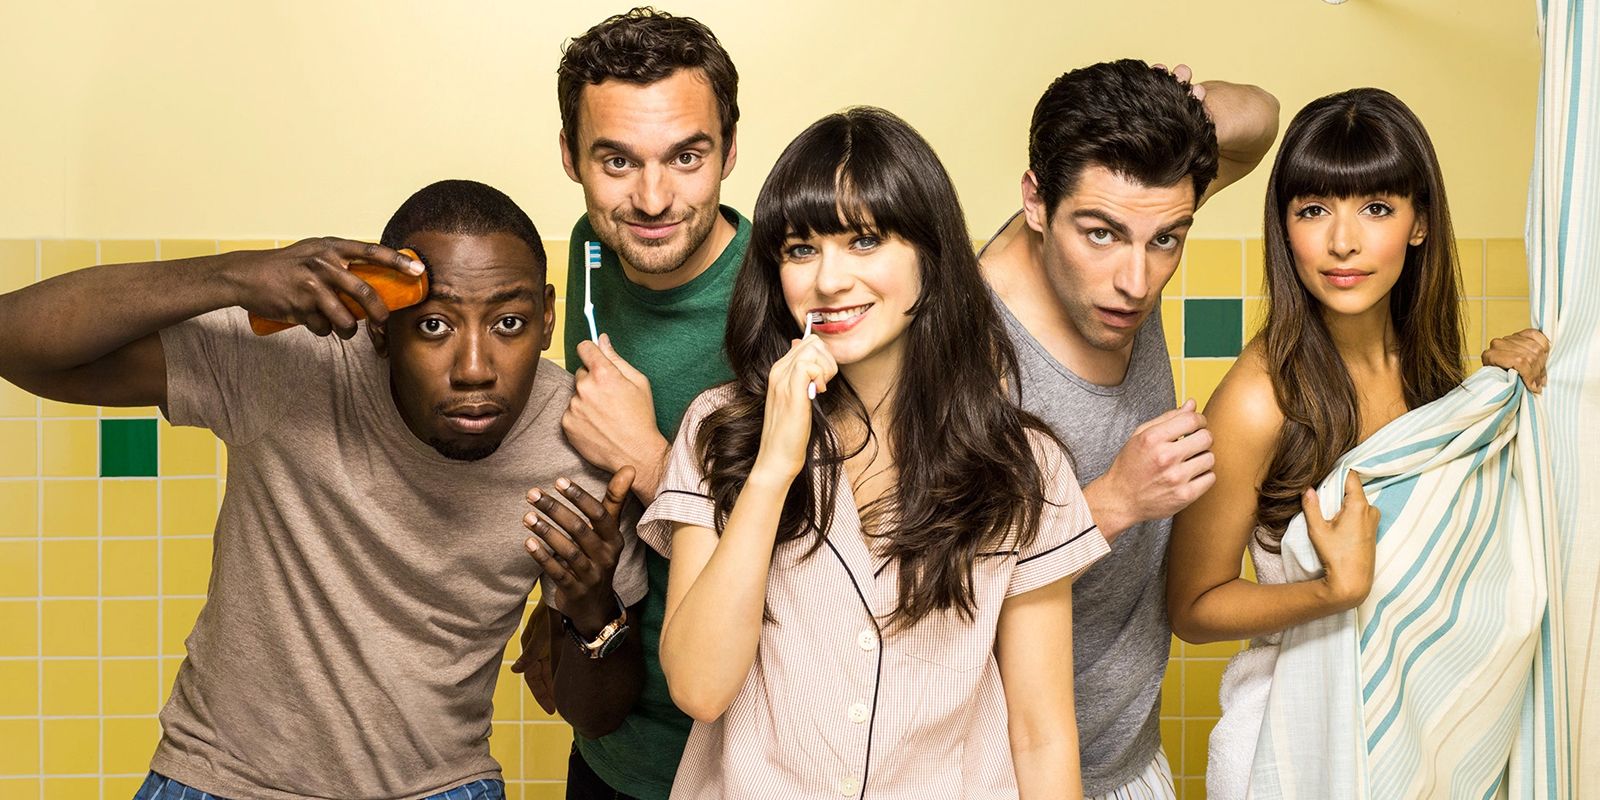 The New Girl cast posing in a bathroom